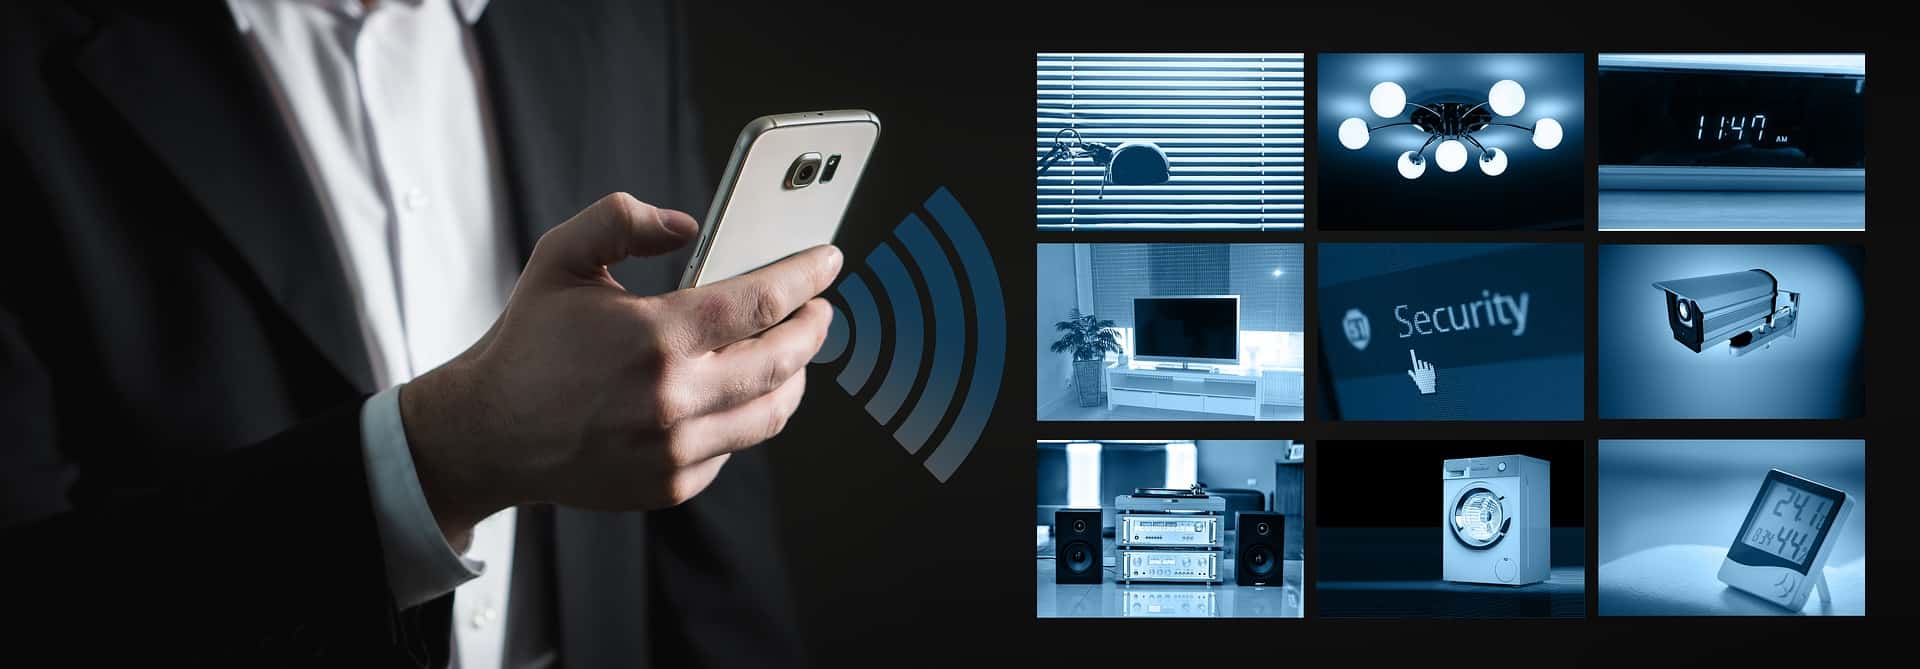 Smart Security Technology For Your Home